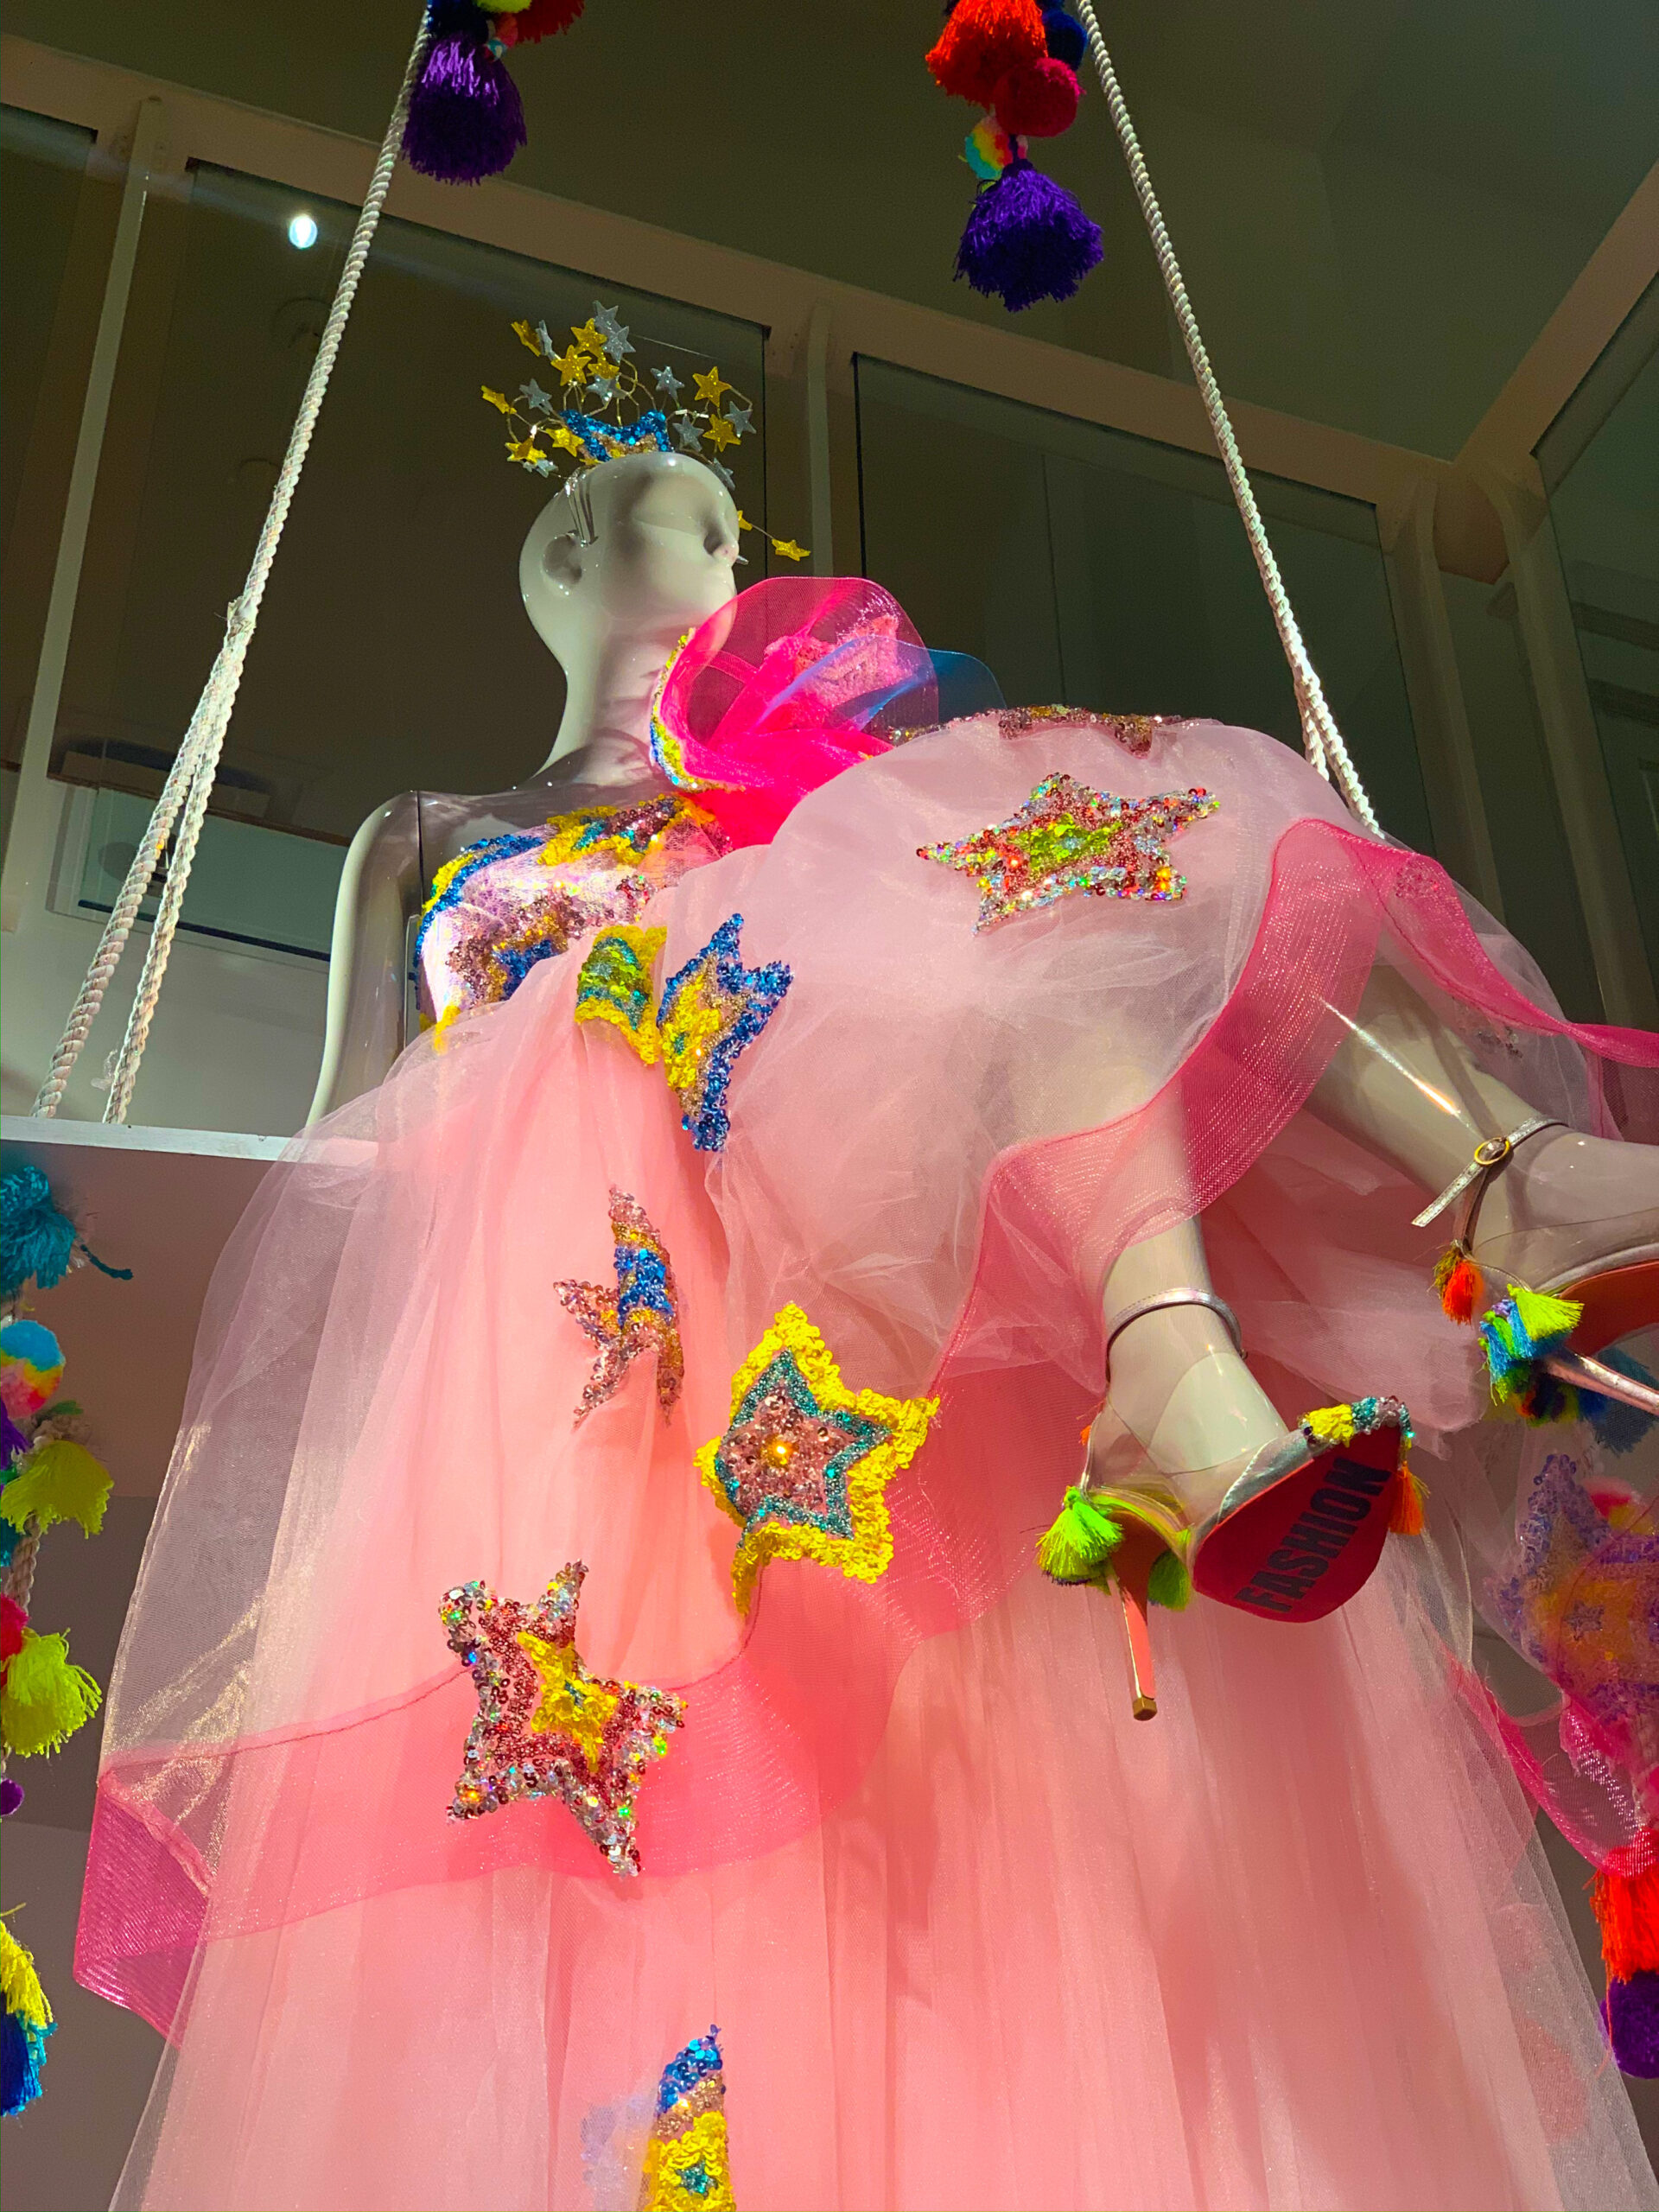 Art Couture at Cornell Art Museum